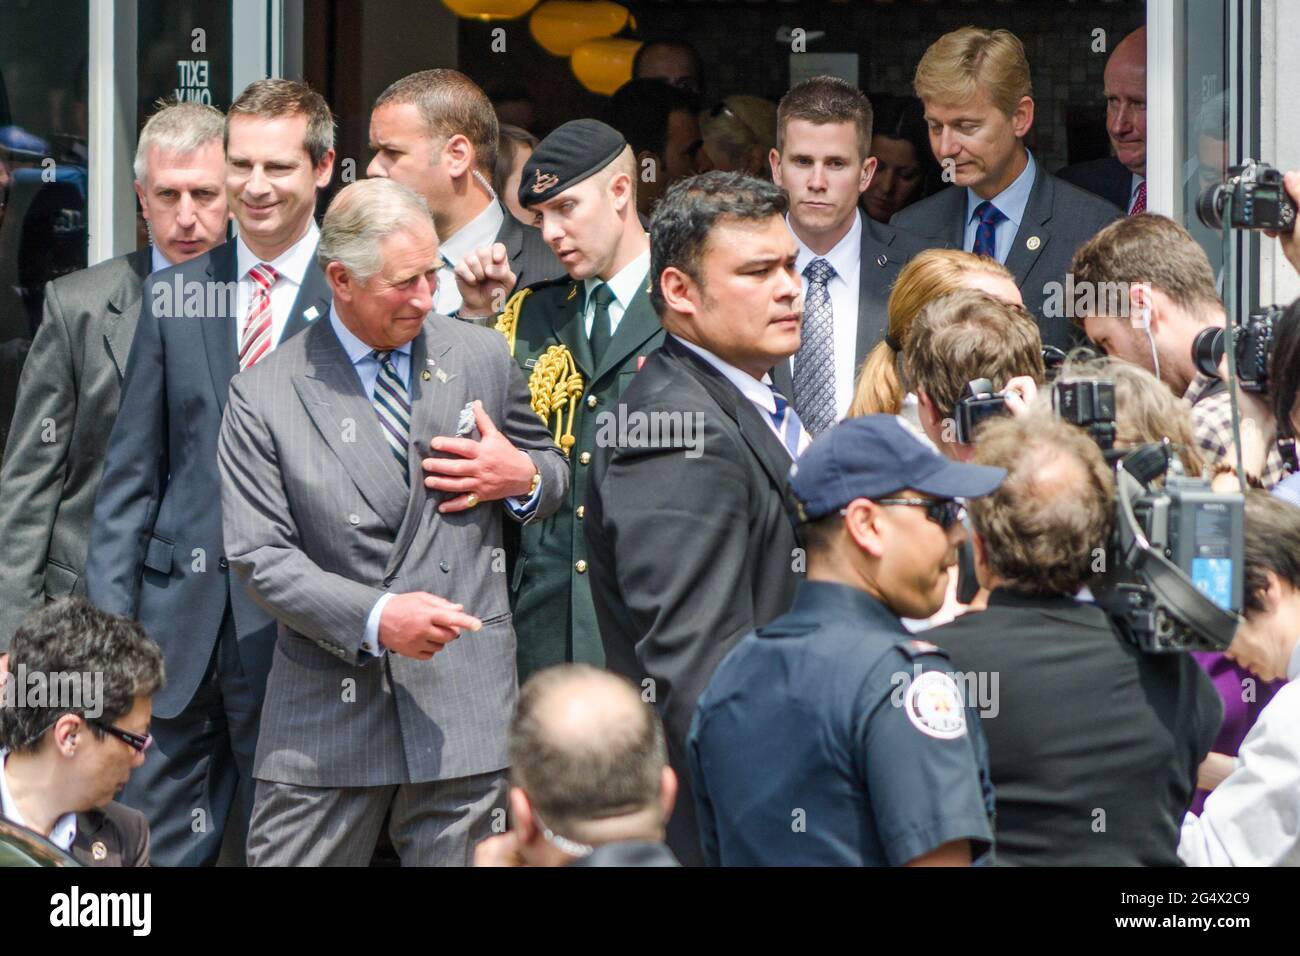 Prince Charles and the Premier of Ontario Dalton McGuinty leave Ryerson University. The visit was part of the Queen's Diamond Jubilee celebrations. Stock Photo